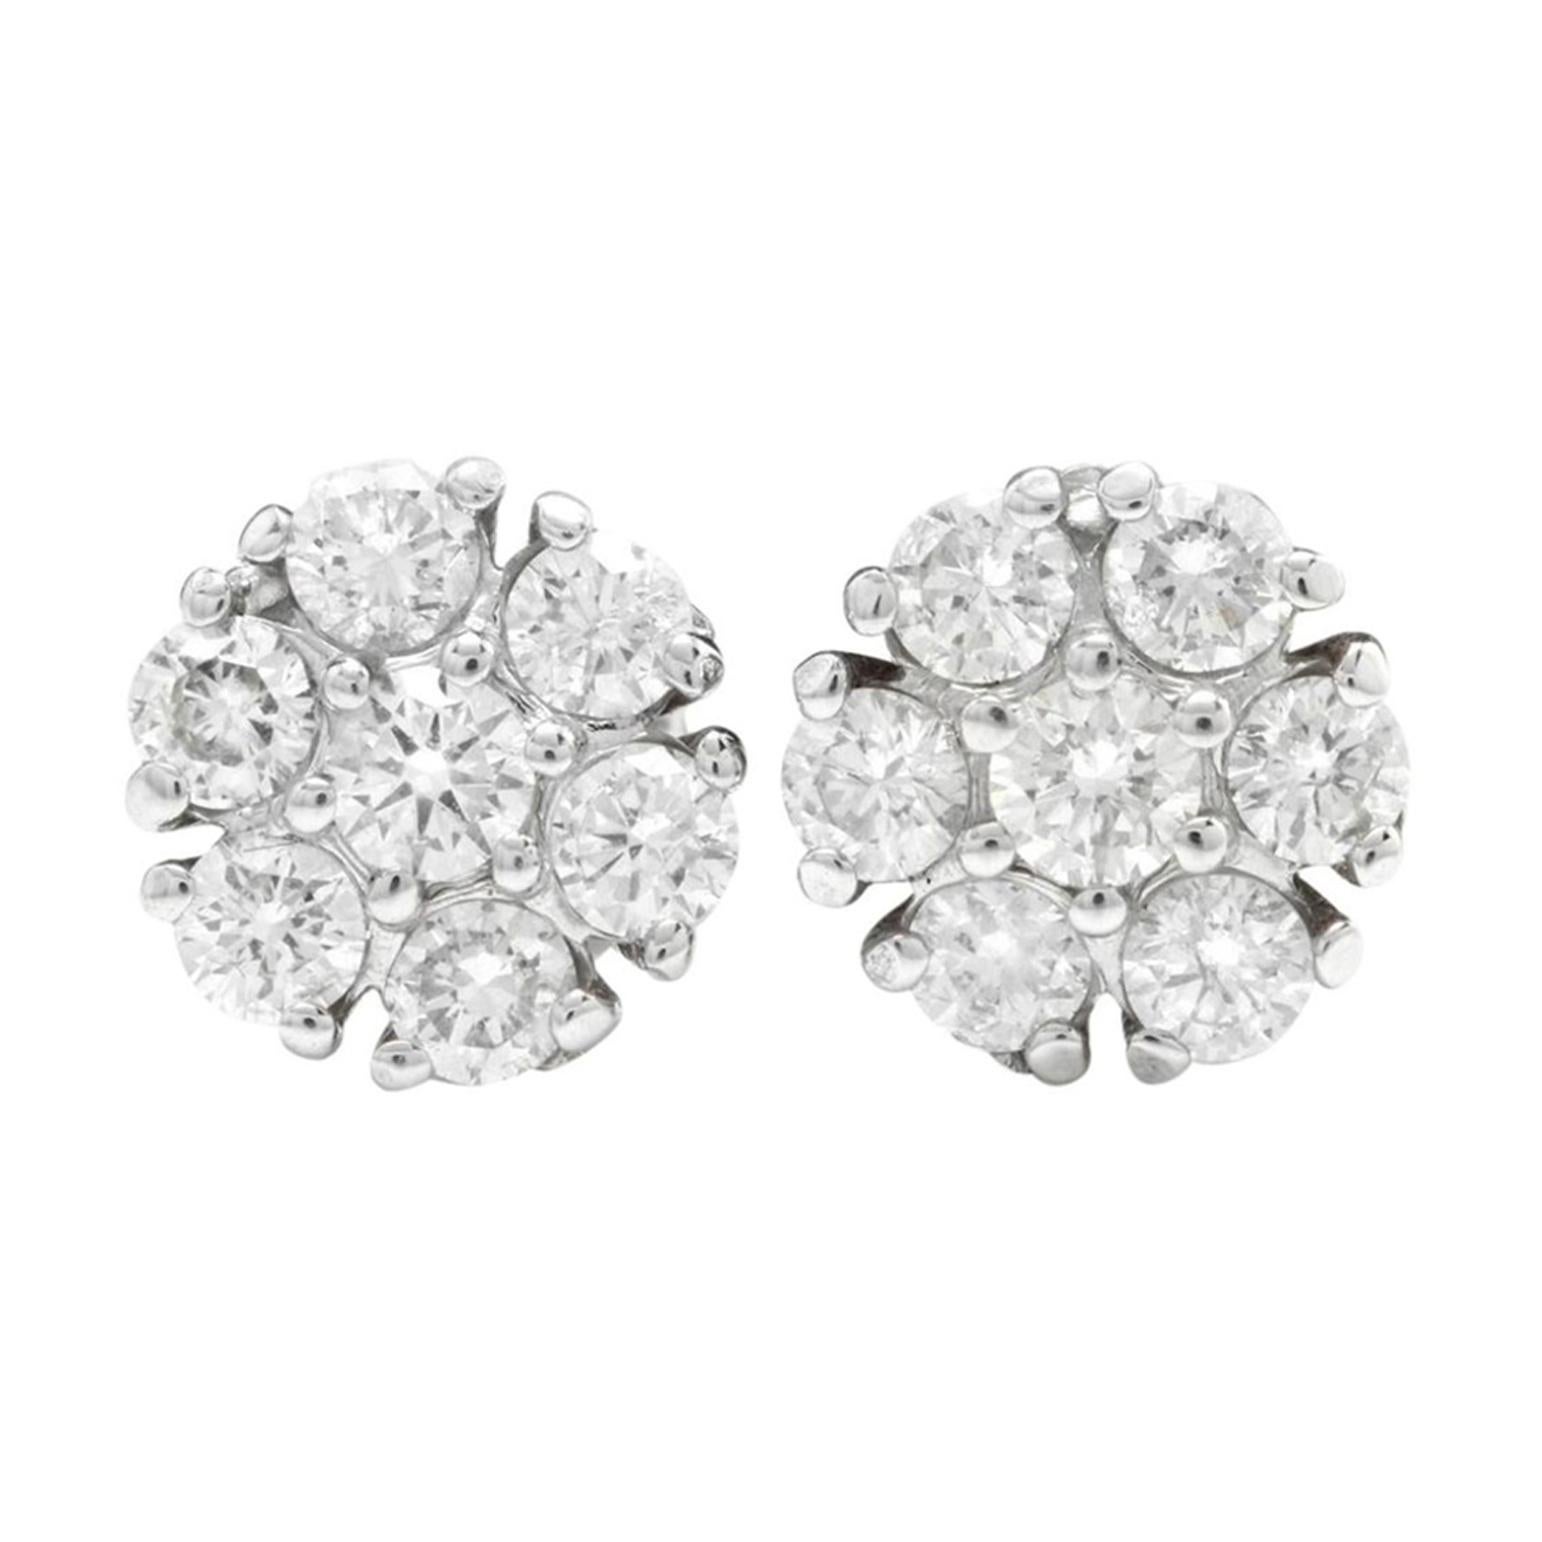 Exquisite 1.15 Carat Natural Diamond 14 Karat Solid White Gold Stud Earrings For Sale